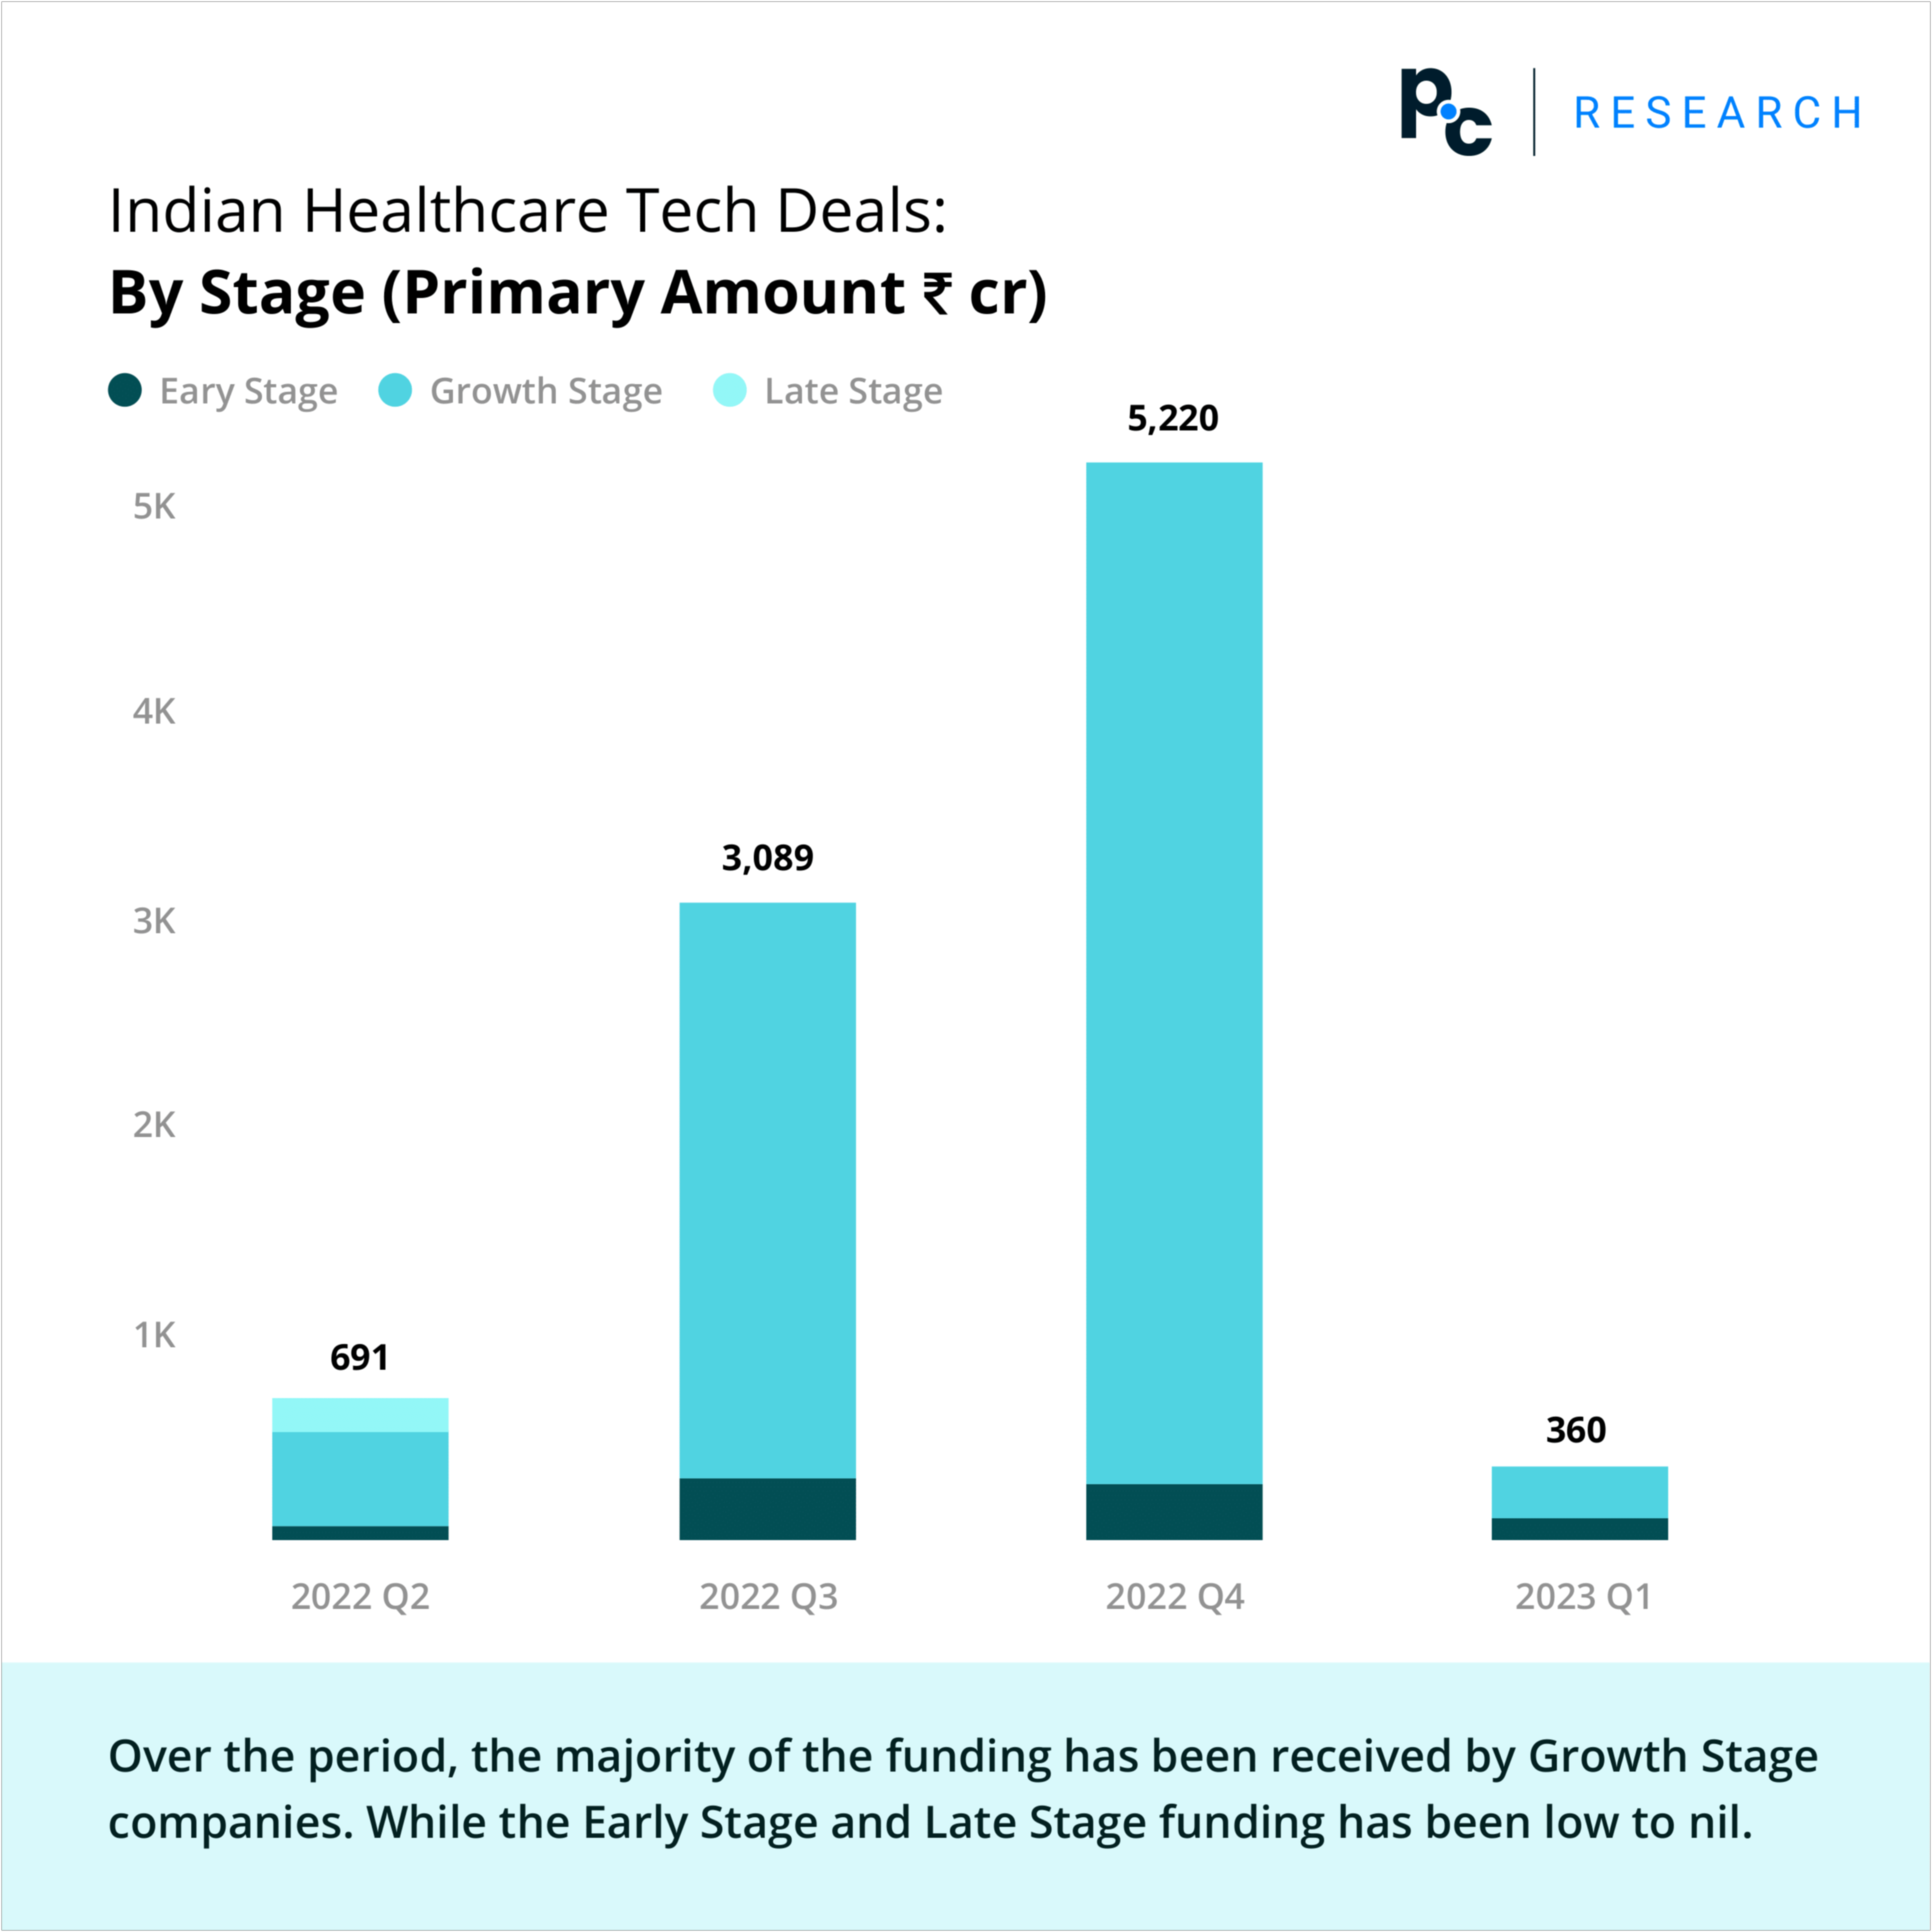 Indian Healthcare Tech Deals: By Stage (Primary Amount ₹ cr).

Over the period, the majority of the funding has been received by Growth Stage companies. While the Early Stage and Late Stage funding has been low to nil. 
